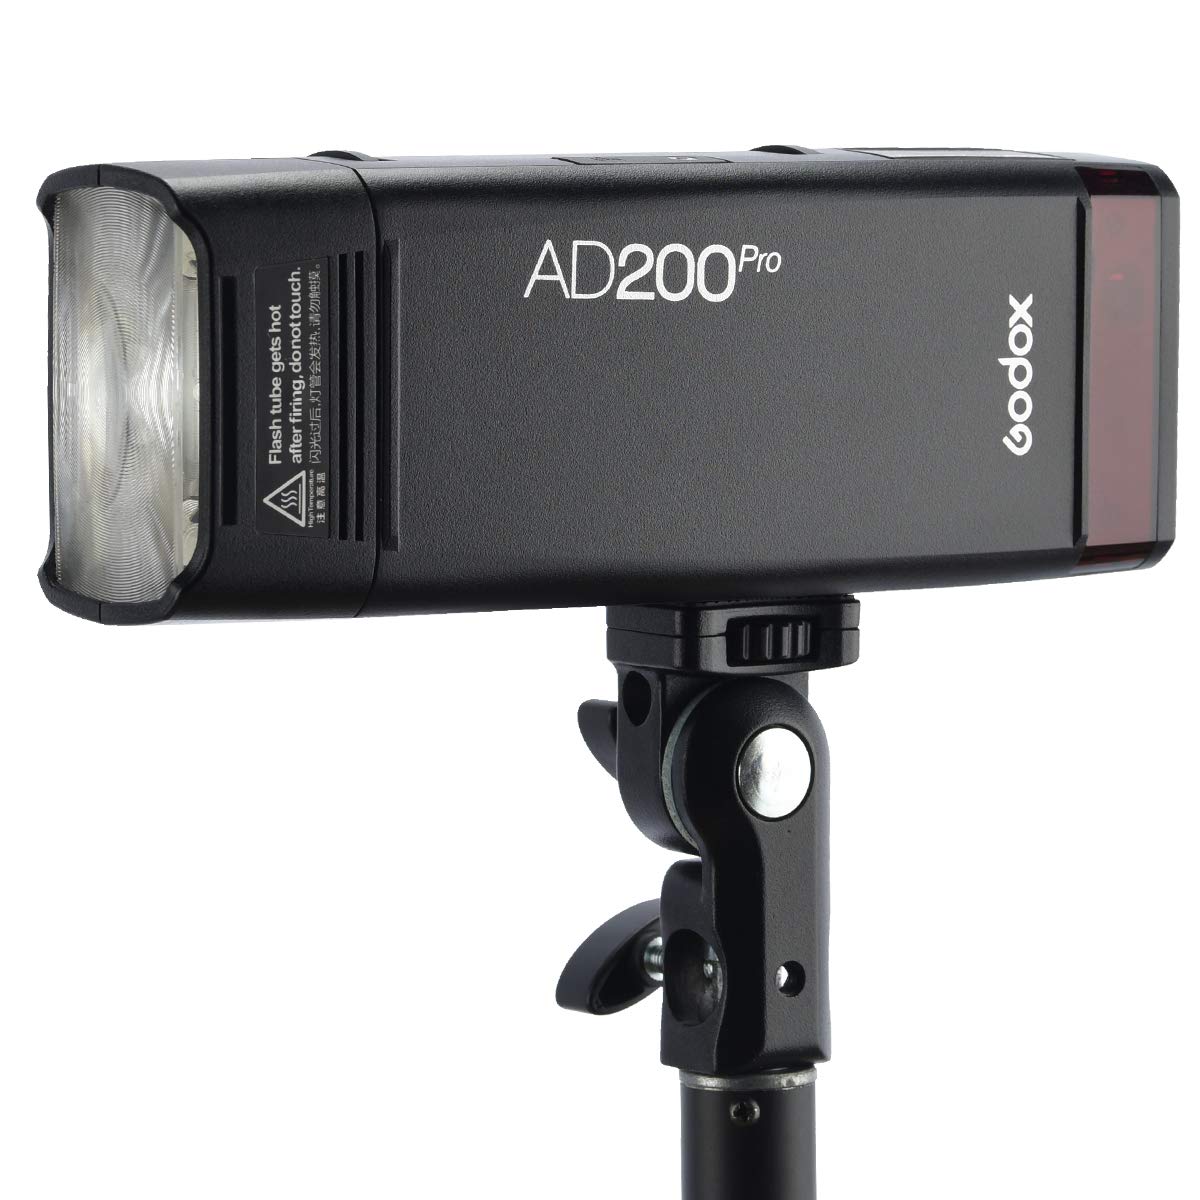 GODOX AD200Pro AD200 Pro with BD-07 Barn Door Honeycomb Grid 4 Color Filter Kit, Standard Reflector with Soft Diffuser, 200W 2.4G Flash Strobe, 1/8000 HSS, 500 Full Power Flashes, 0.01-2.1s Recycling